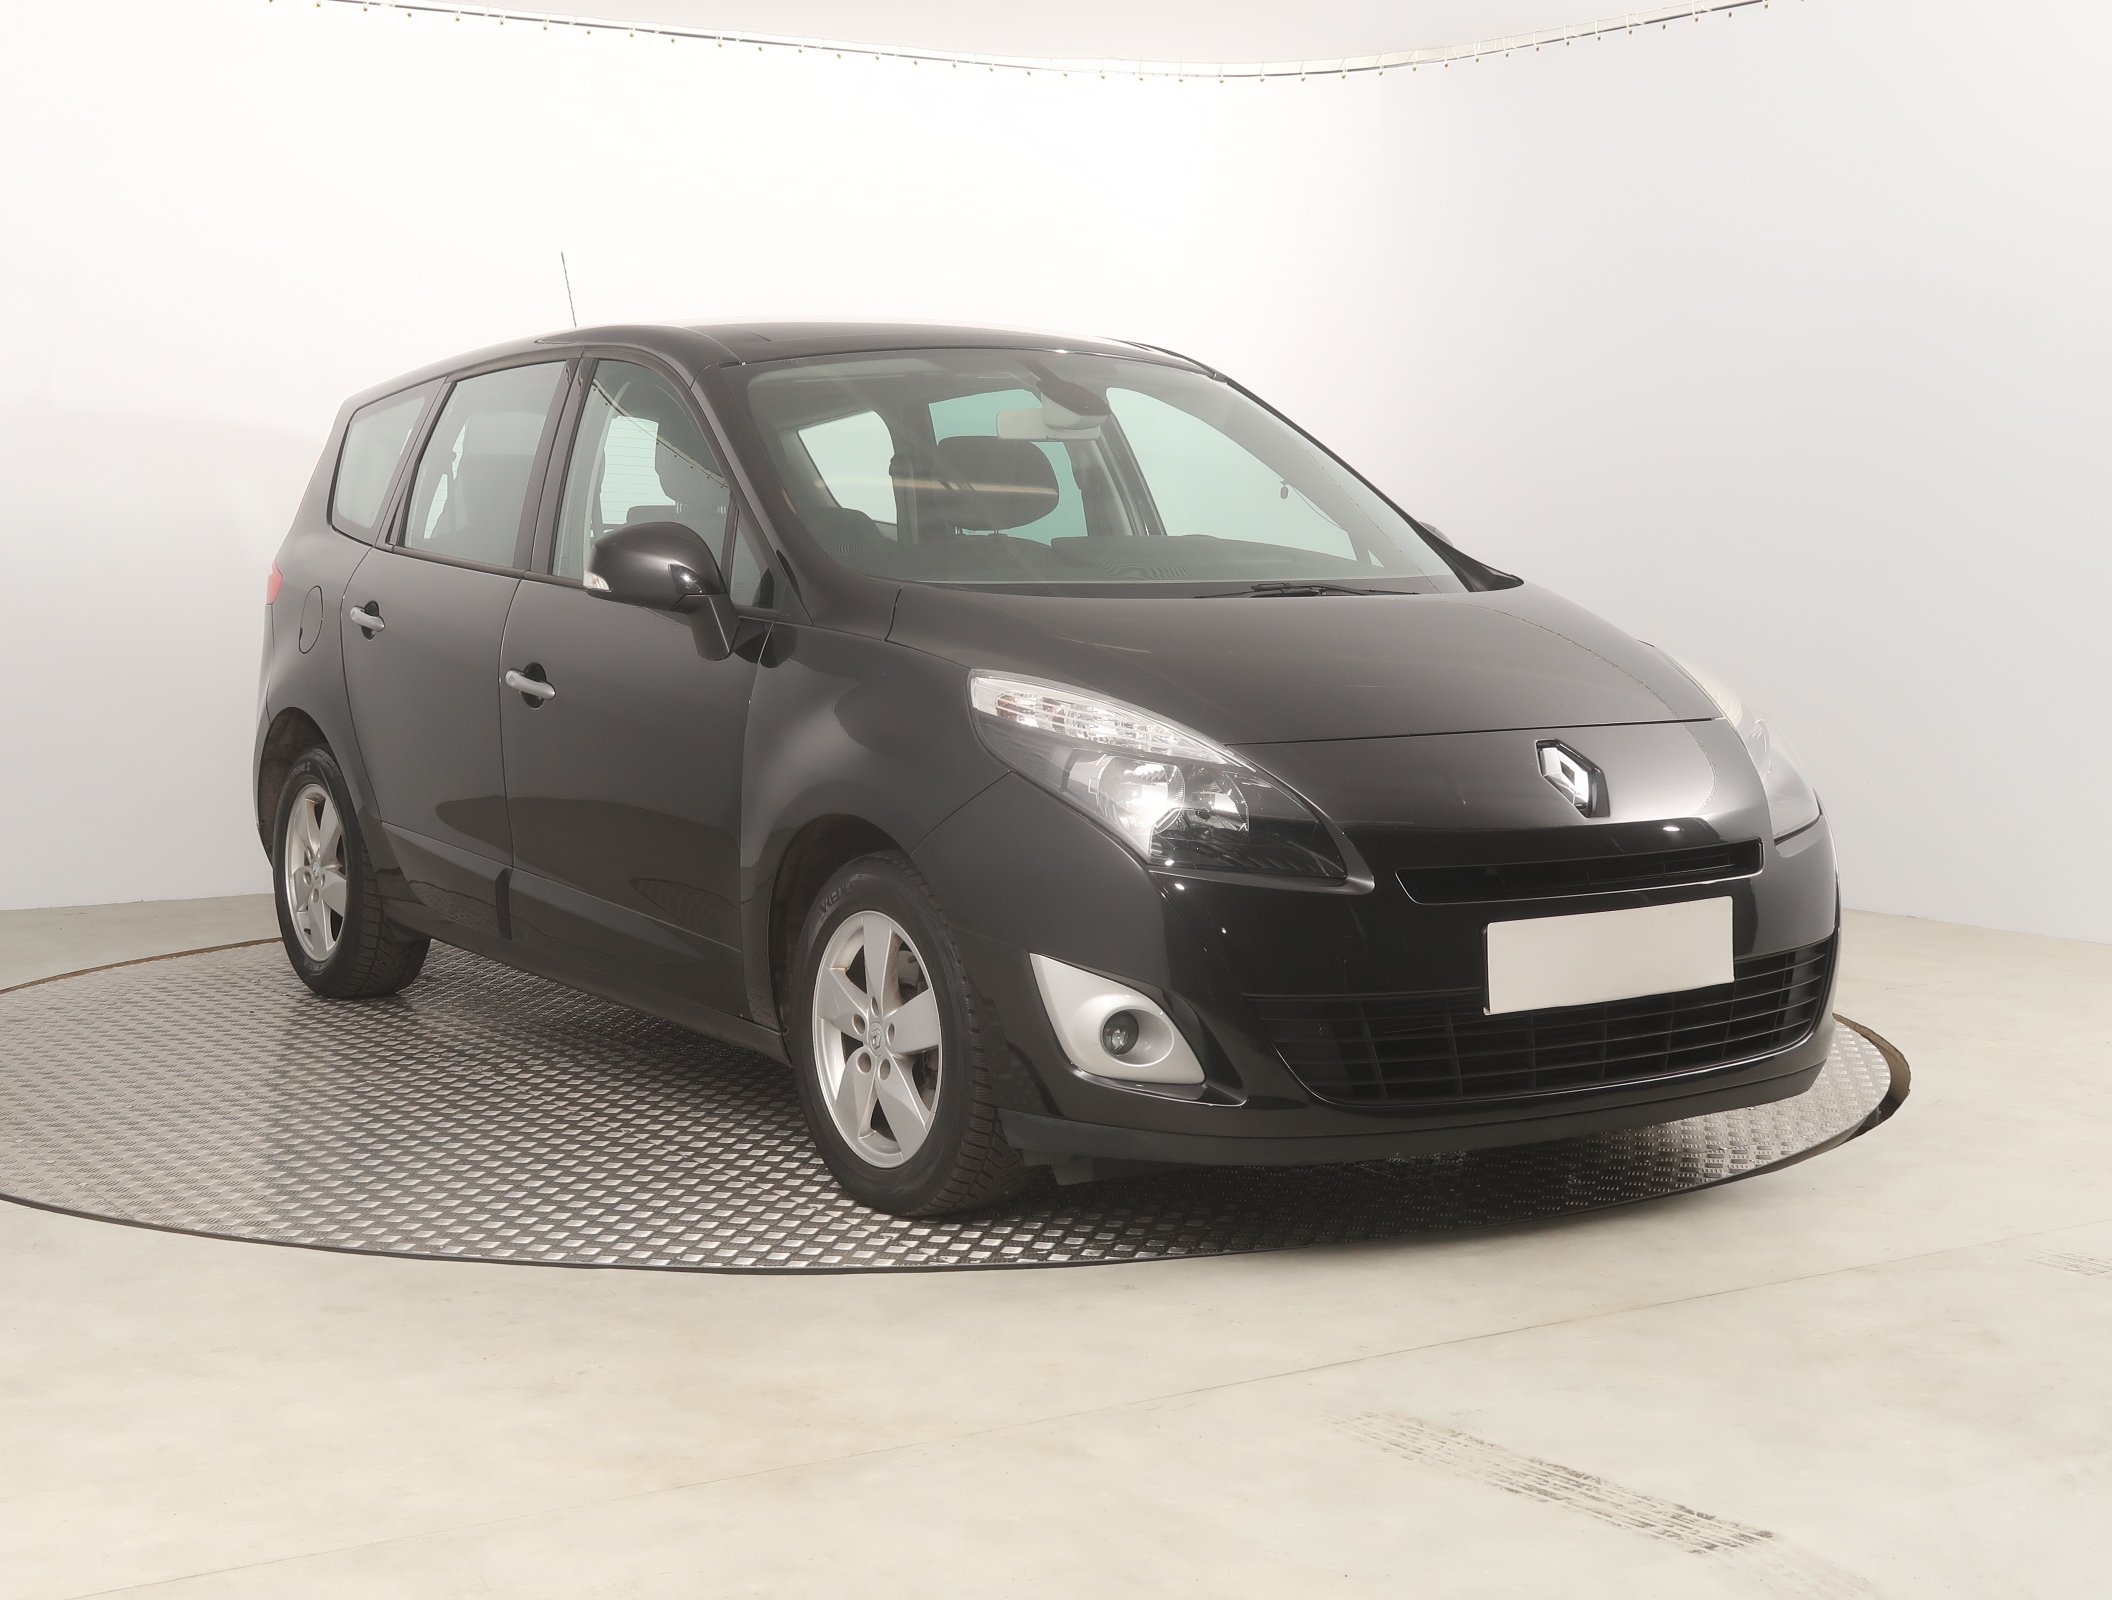 Renault Scenic 1.4 TCe SUV 2009 - 1